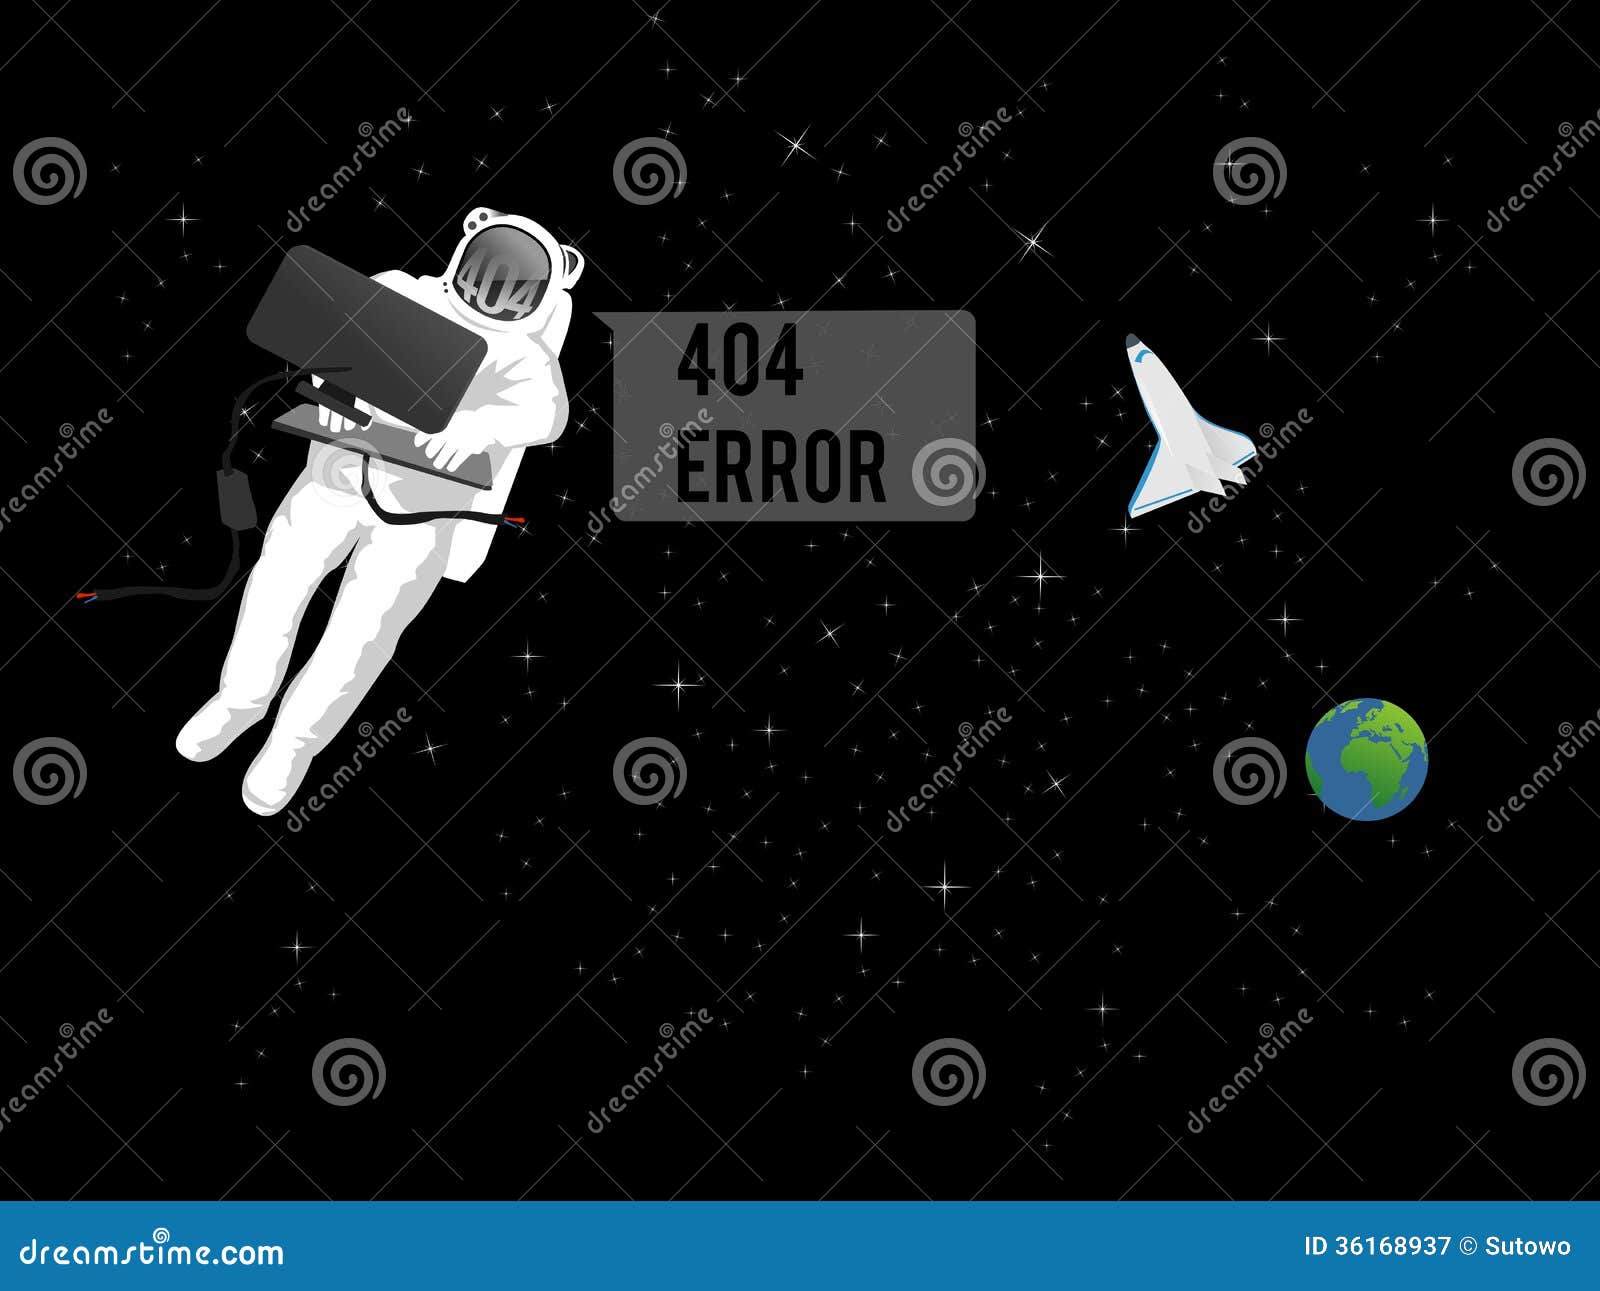 lost in space clipart - photo #21